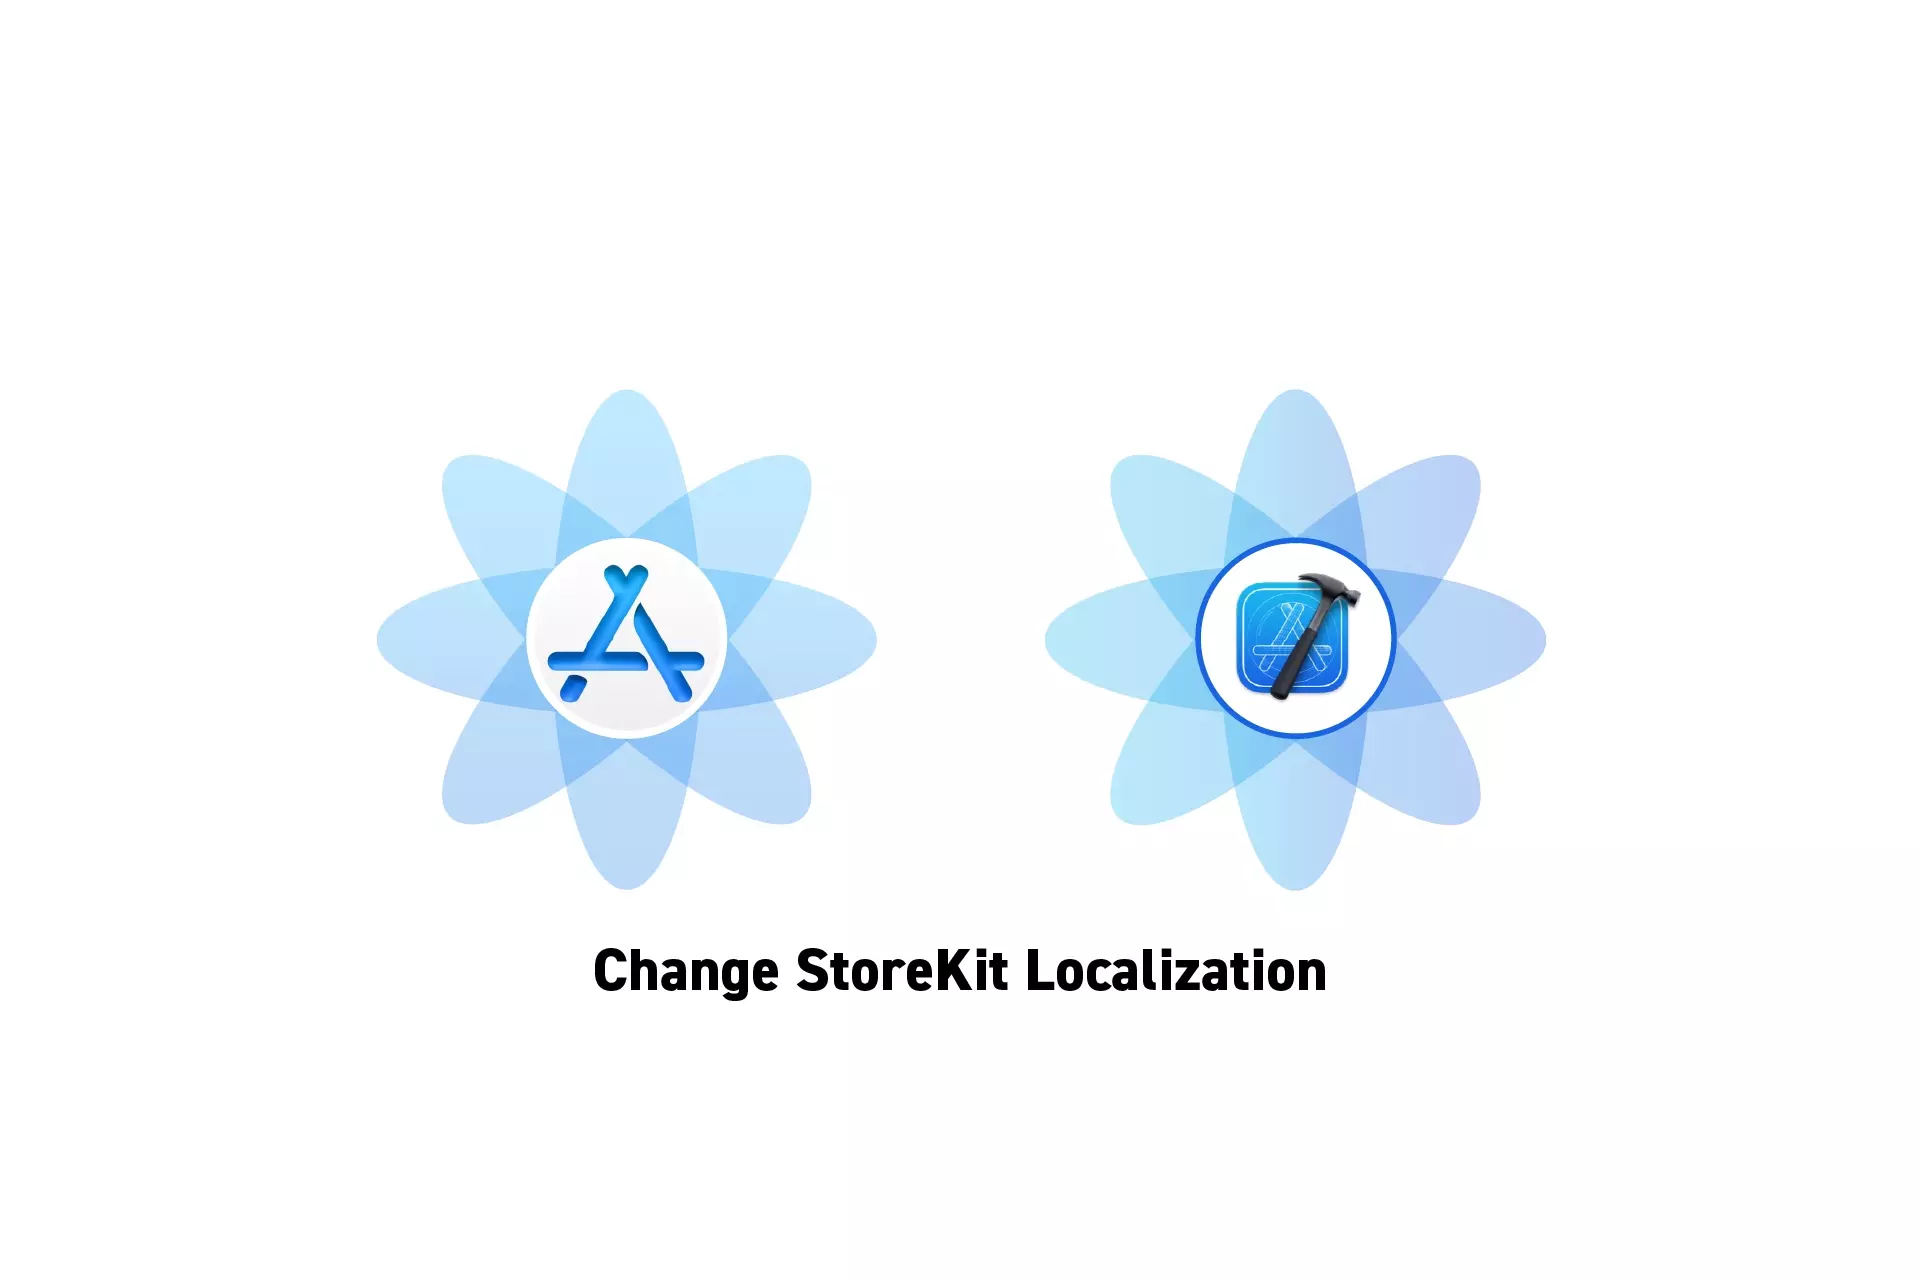 Two flowers that represents StoreKit and Xcode side by side. Beneath them sits the text "Change StoreKit Localization."